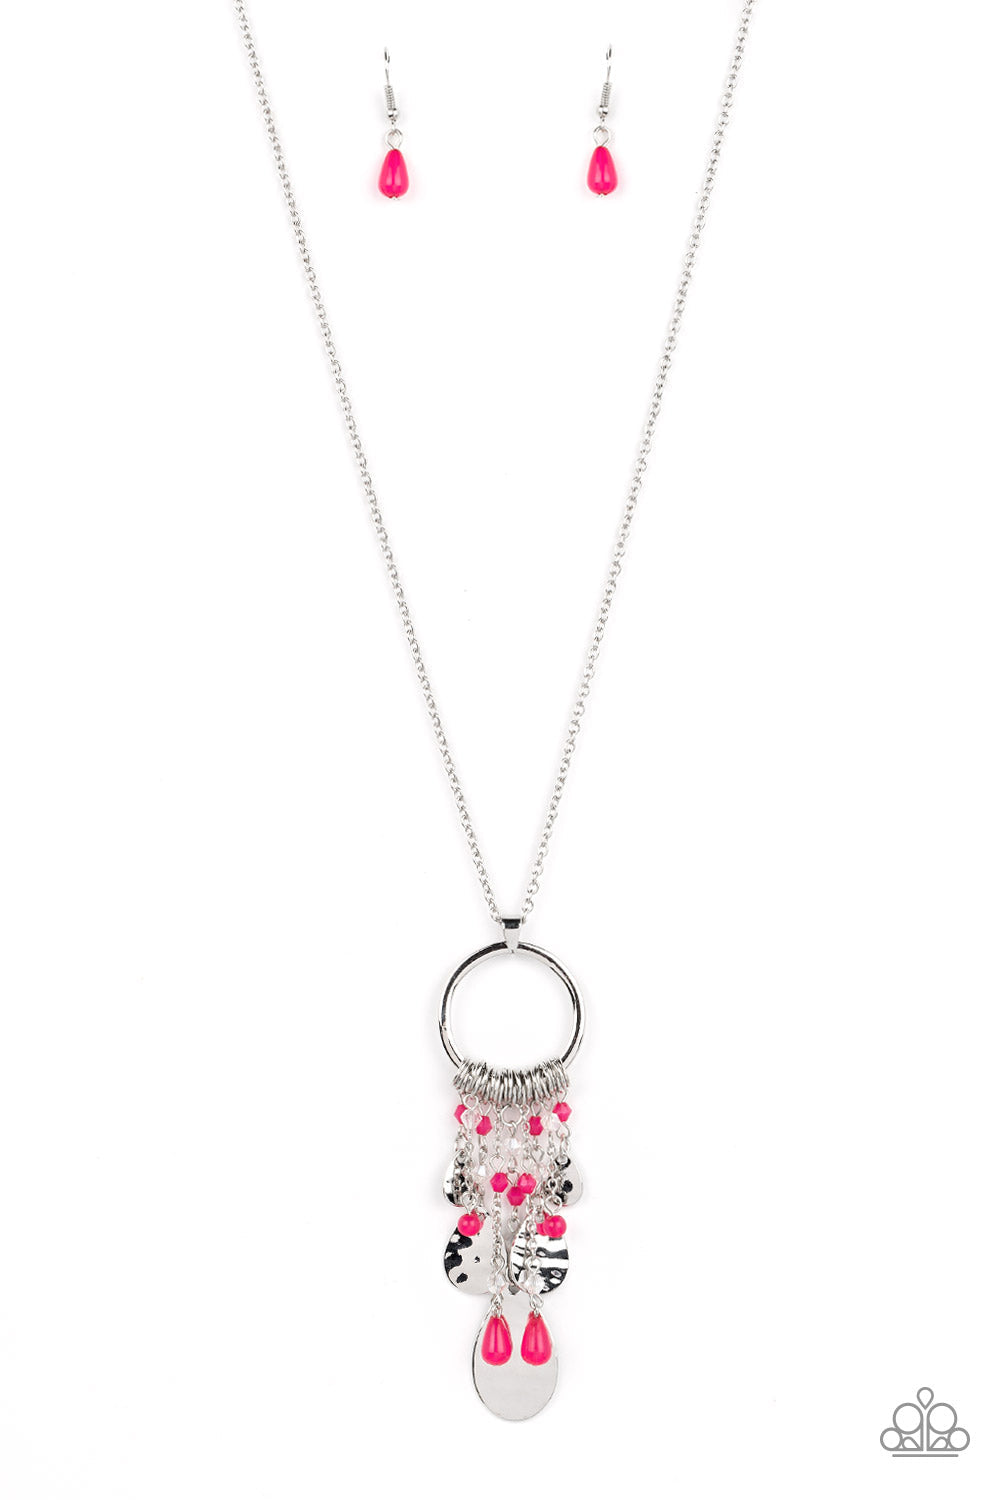 Totally Trolling - Pink Crystal-Like Beads/Hammered Silver Teardrop Pendant Paparazzi Necklace & matching earrings